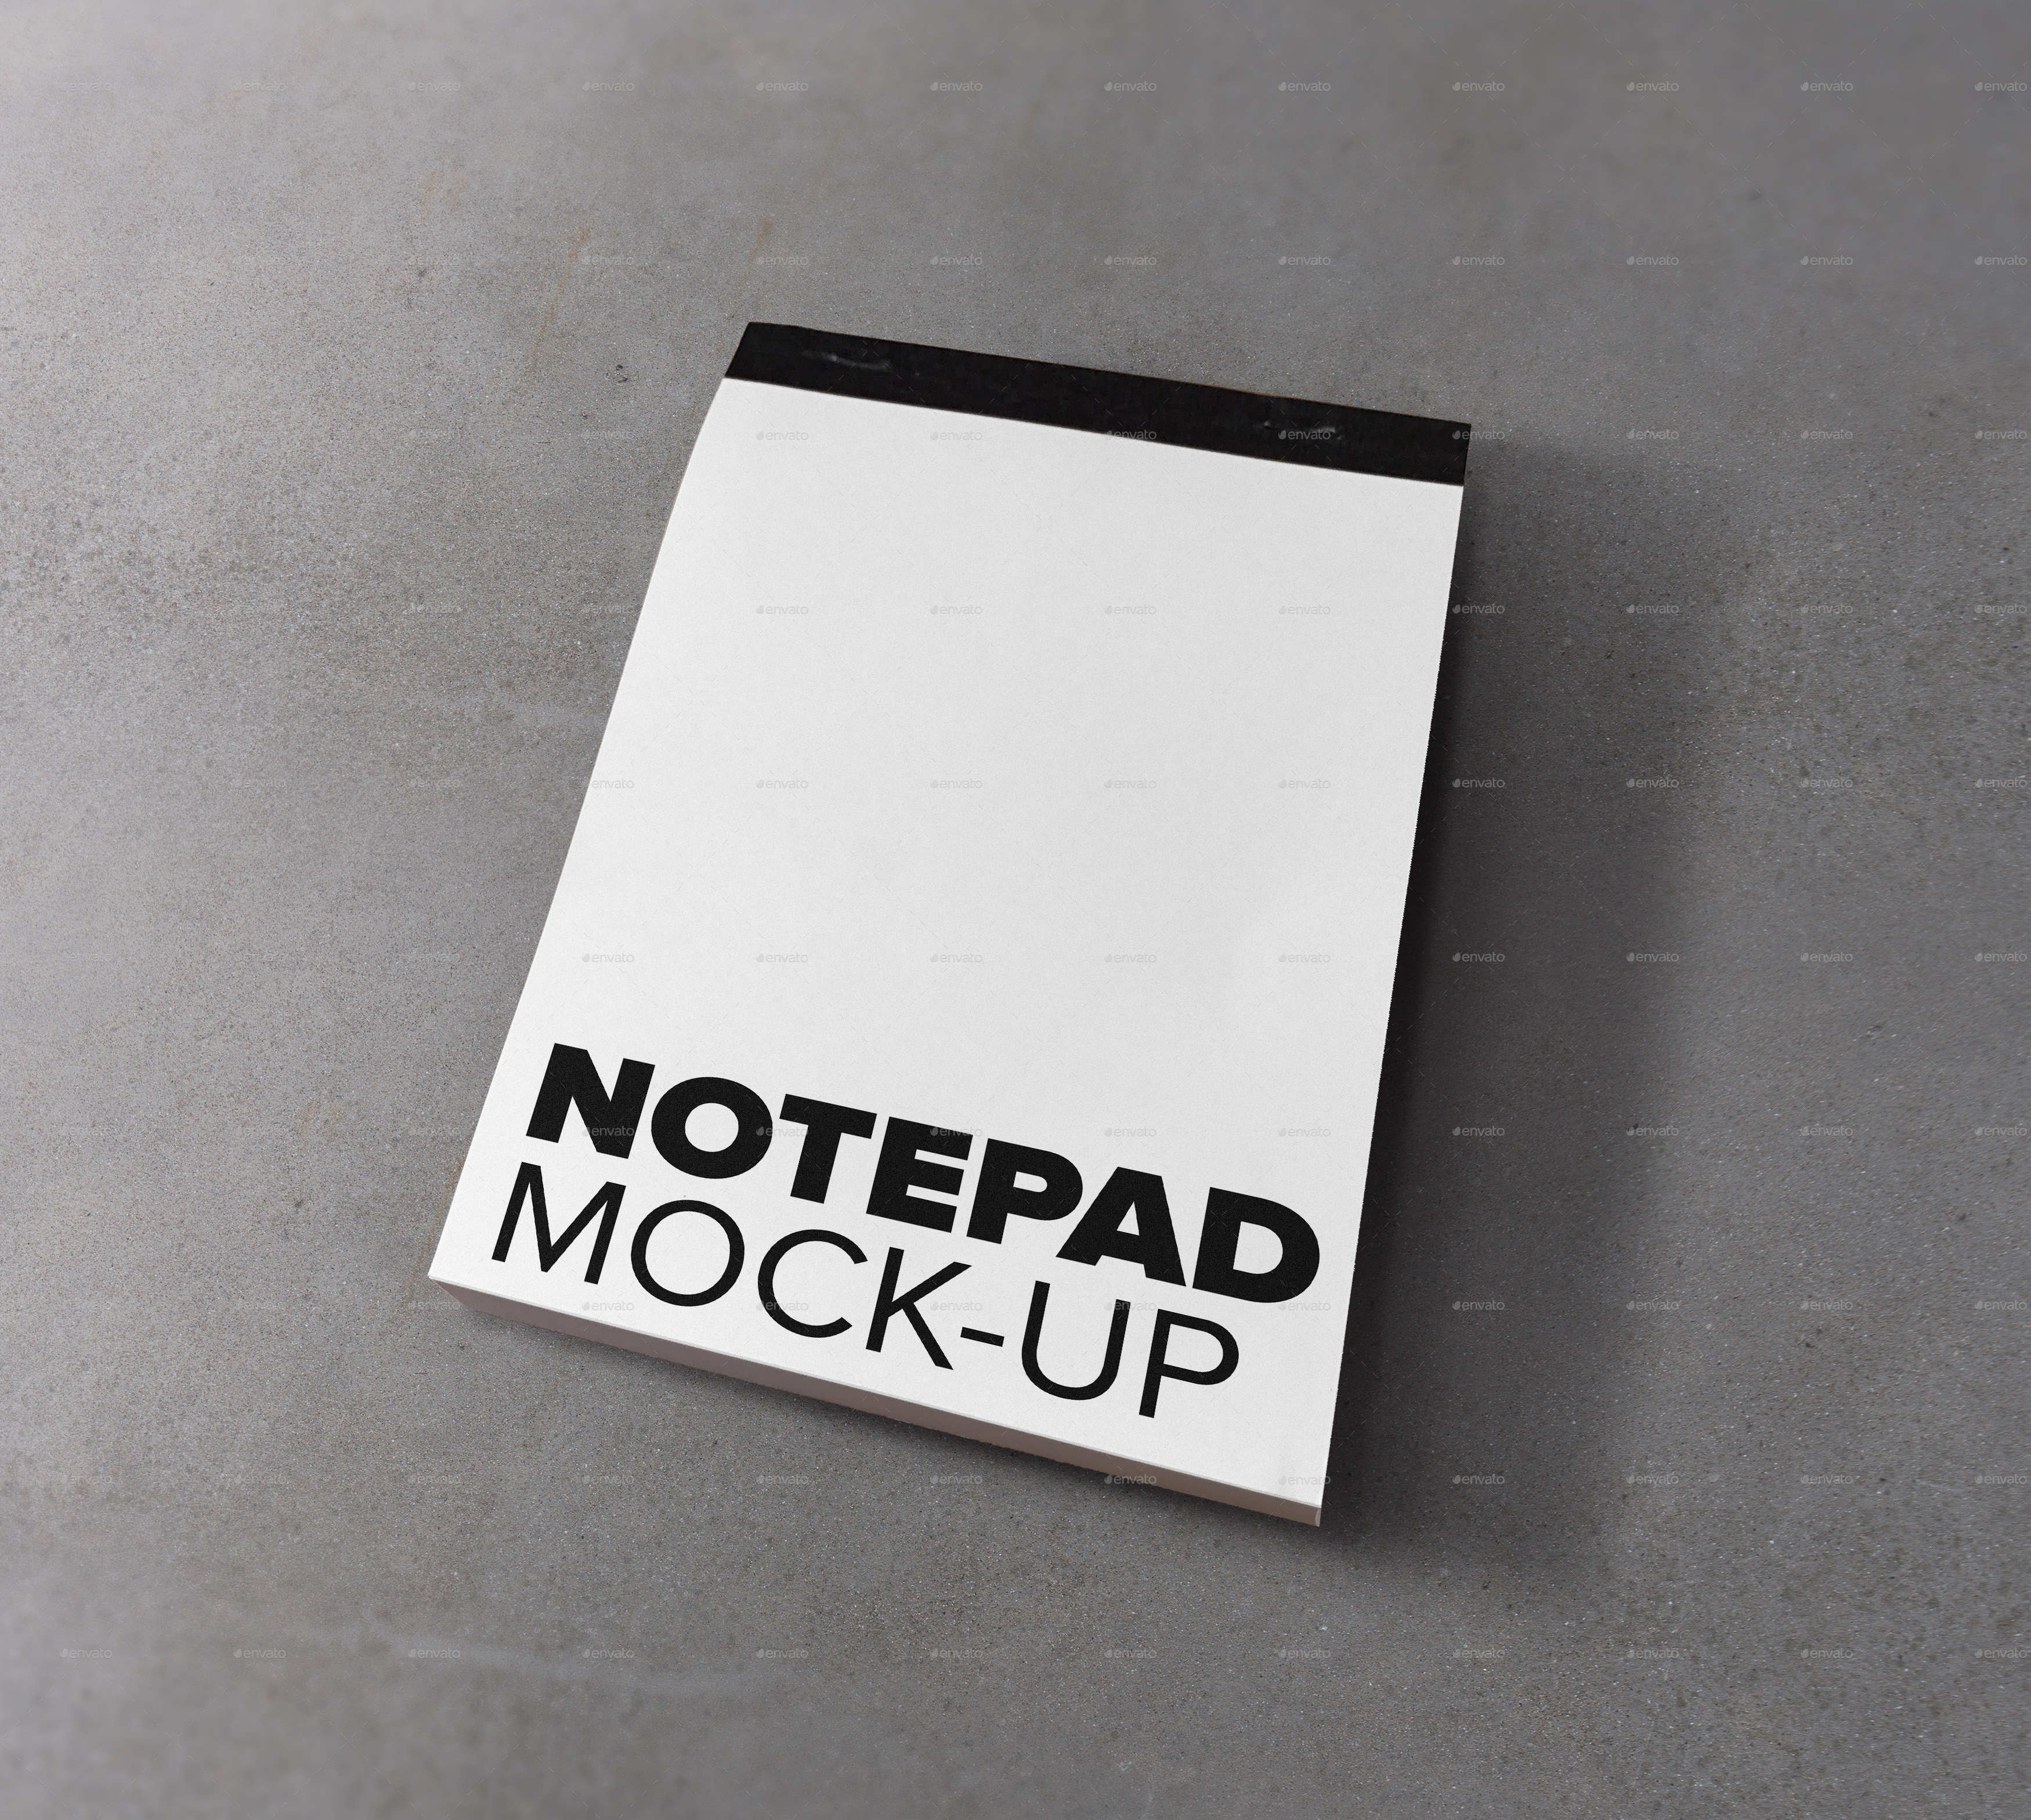 Download Mockup Free Notepad - Notepad PSD Mockup Download for Free- DesignHooks / Today, we are sharing ...